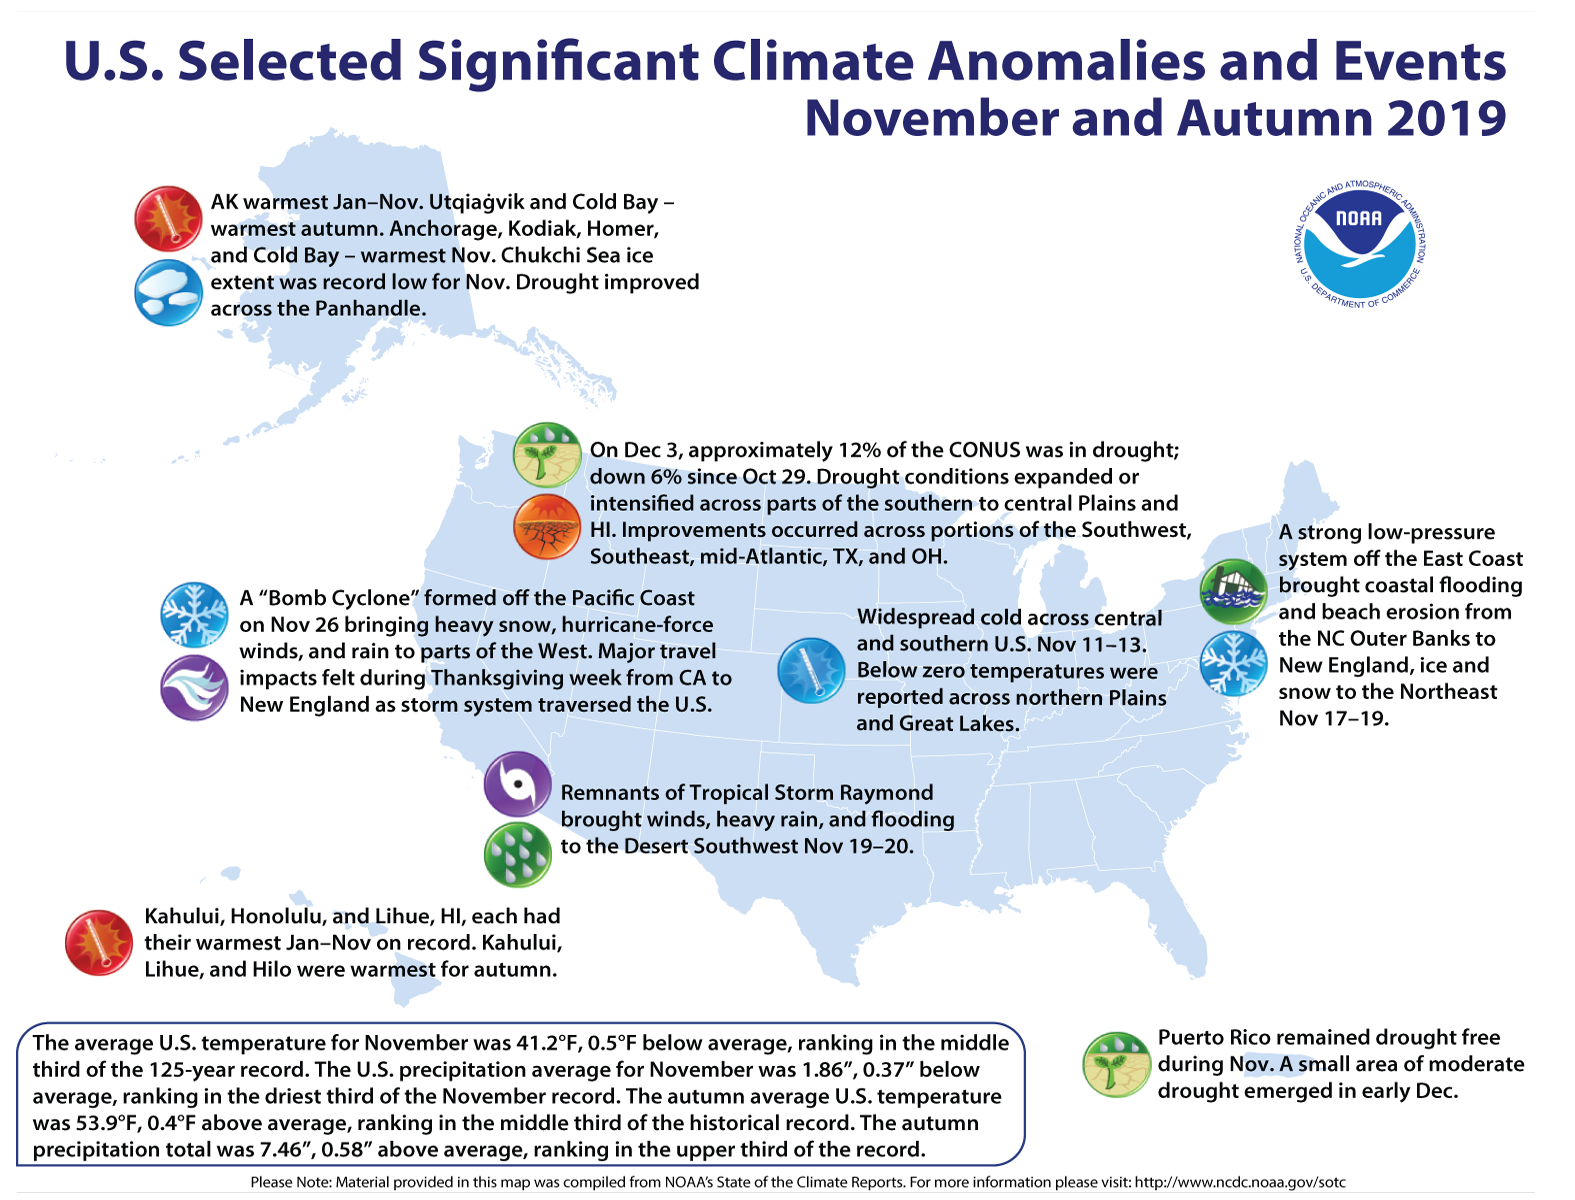 An annotated map of the United States showing notable climate and weather events that occurred across the country during November 2019. To learn more, please visit http://bit.ly/USClimate201911